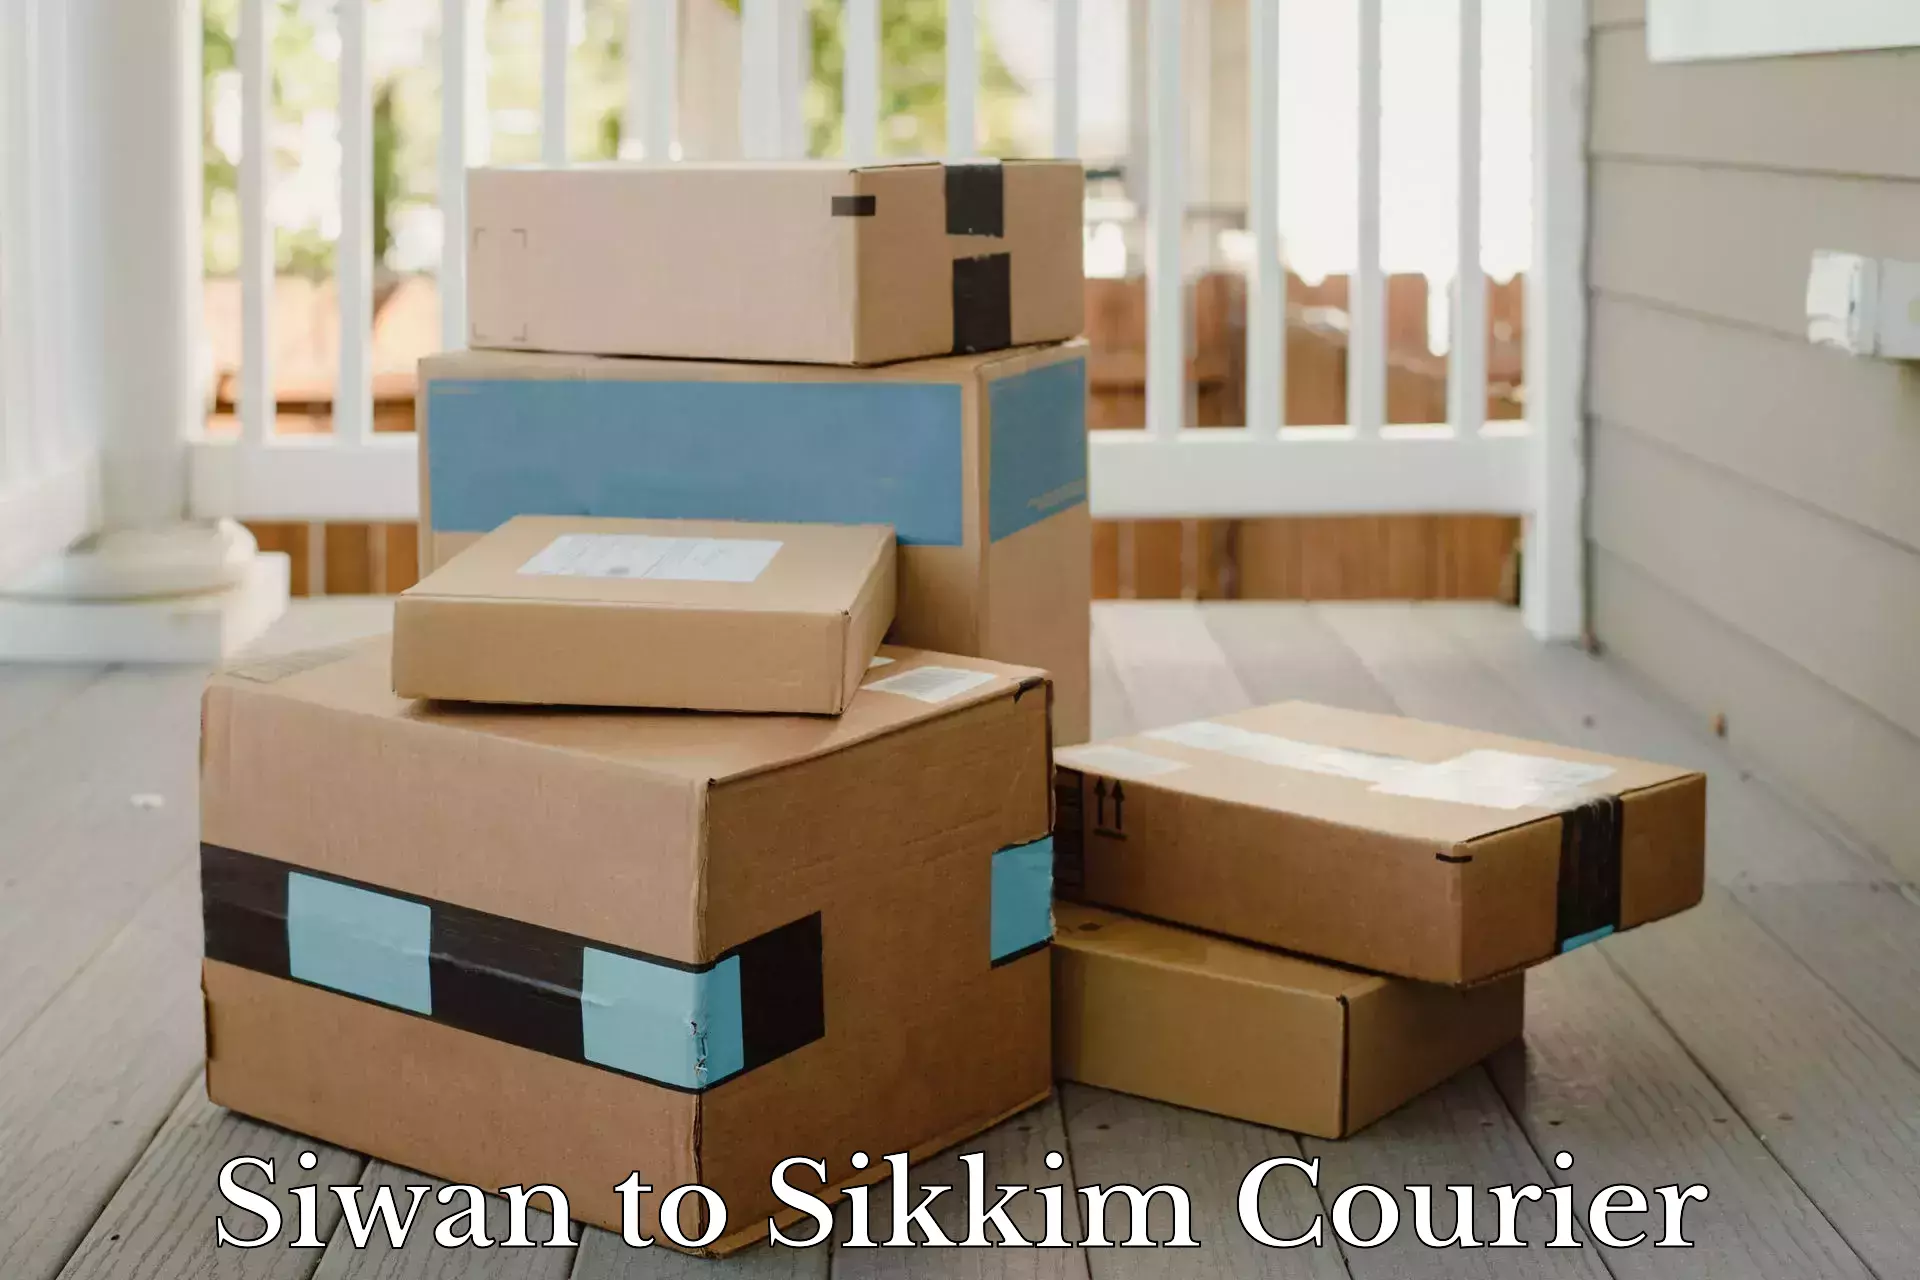 High-capacity parcel service Siwan to Sikkim